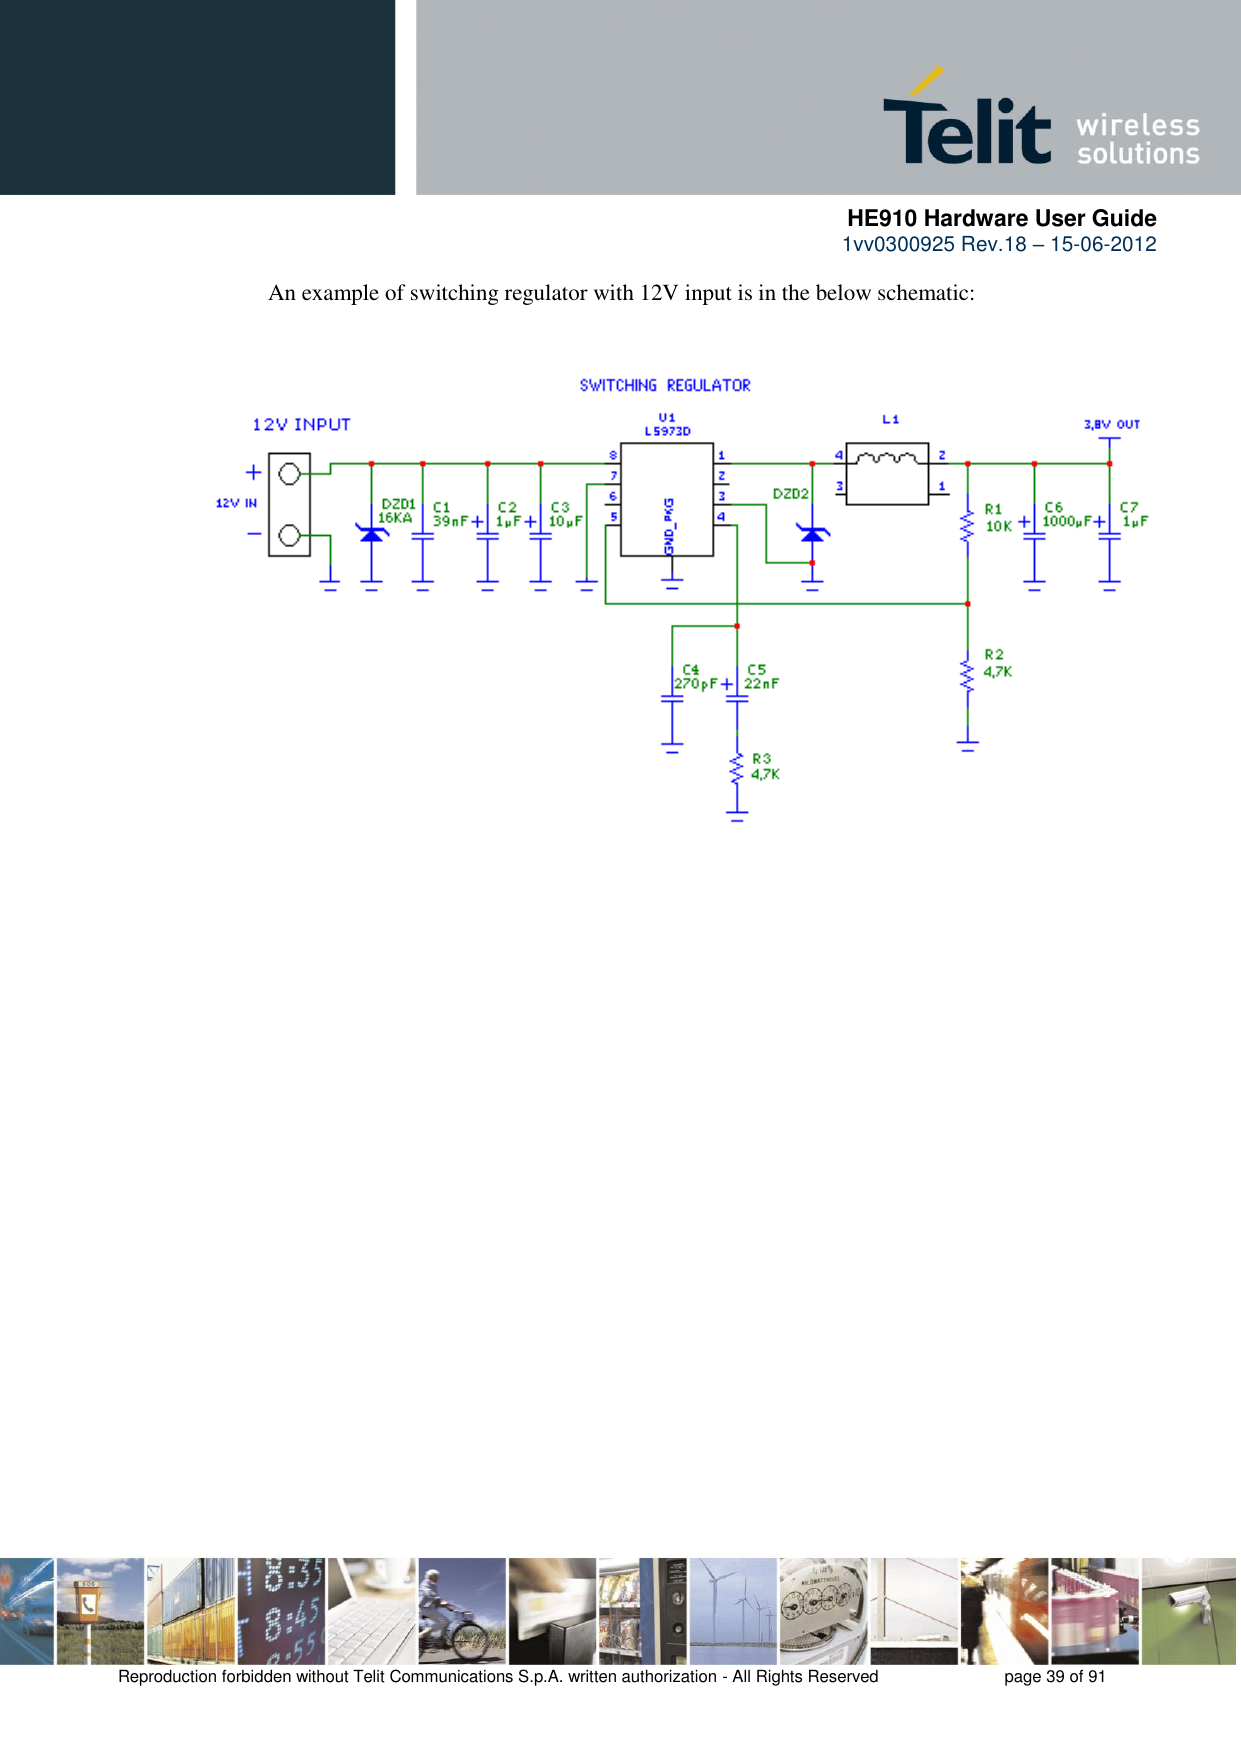      HE910 Hardware User Guide 1vv0300925 Rev.18 – 15-06-2012    Reproduction forbidden without Telit Communications S.p.A. written authorization - All Rights Reserved    page 39 of 91  An example of switching regulator with 12V input is in the below schematic: 